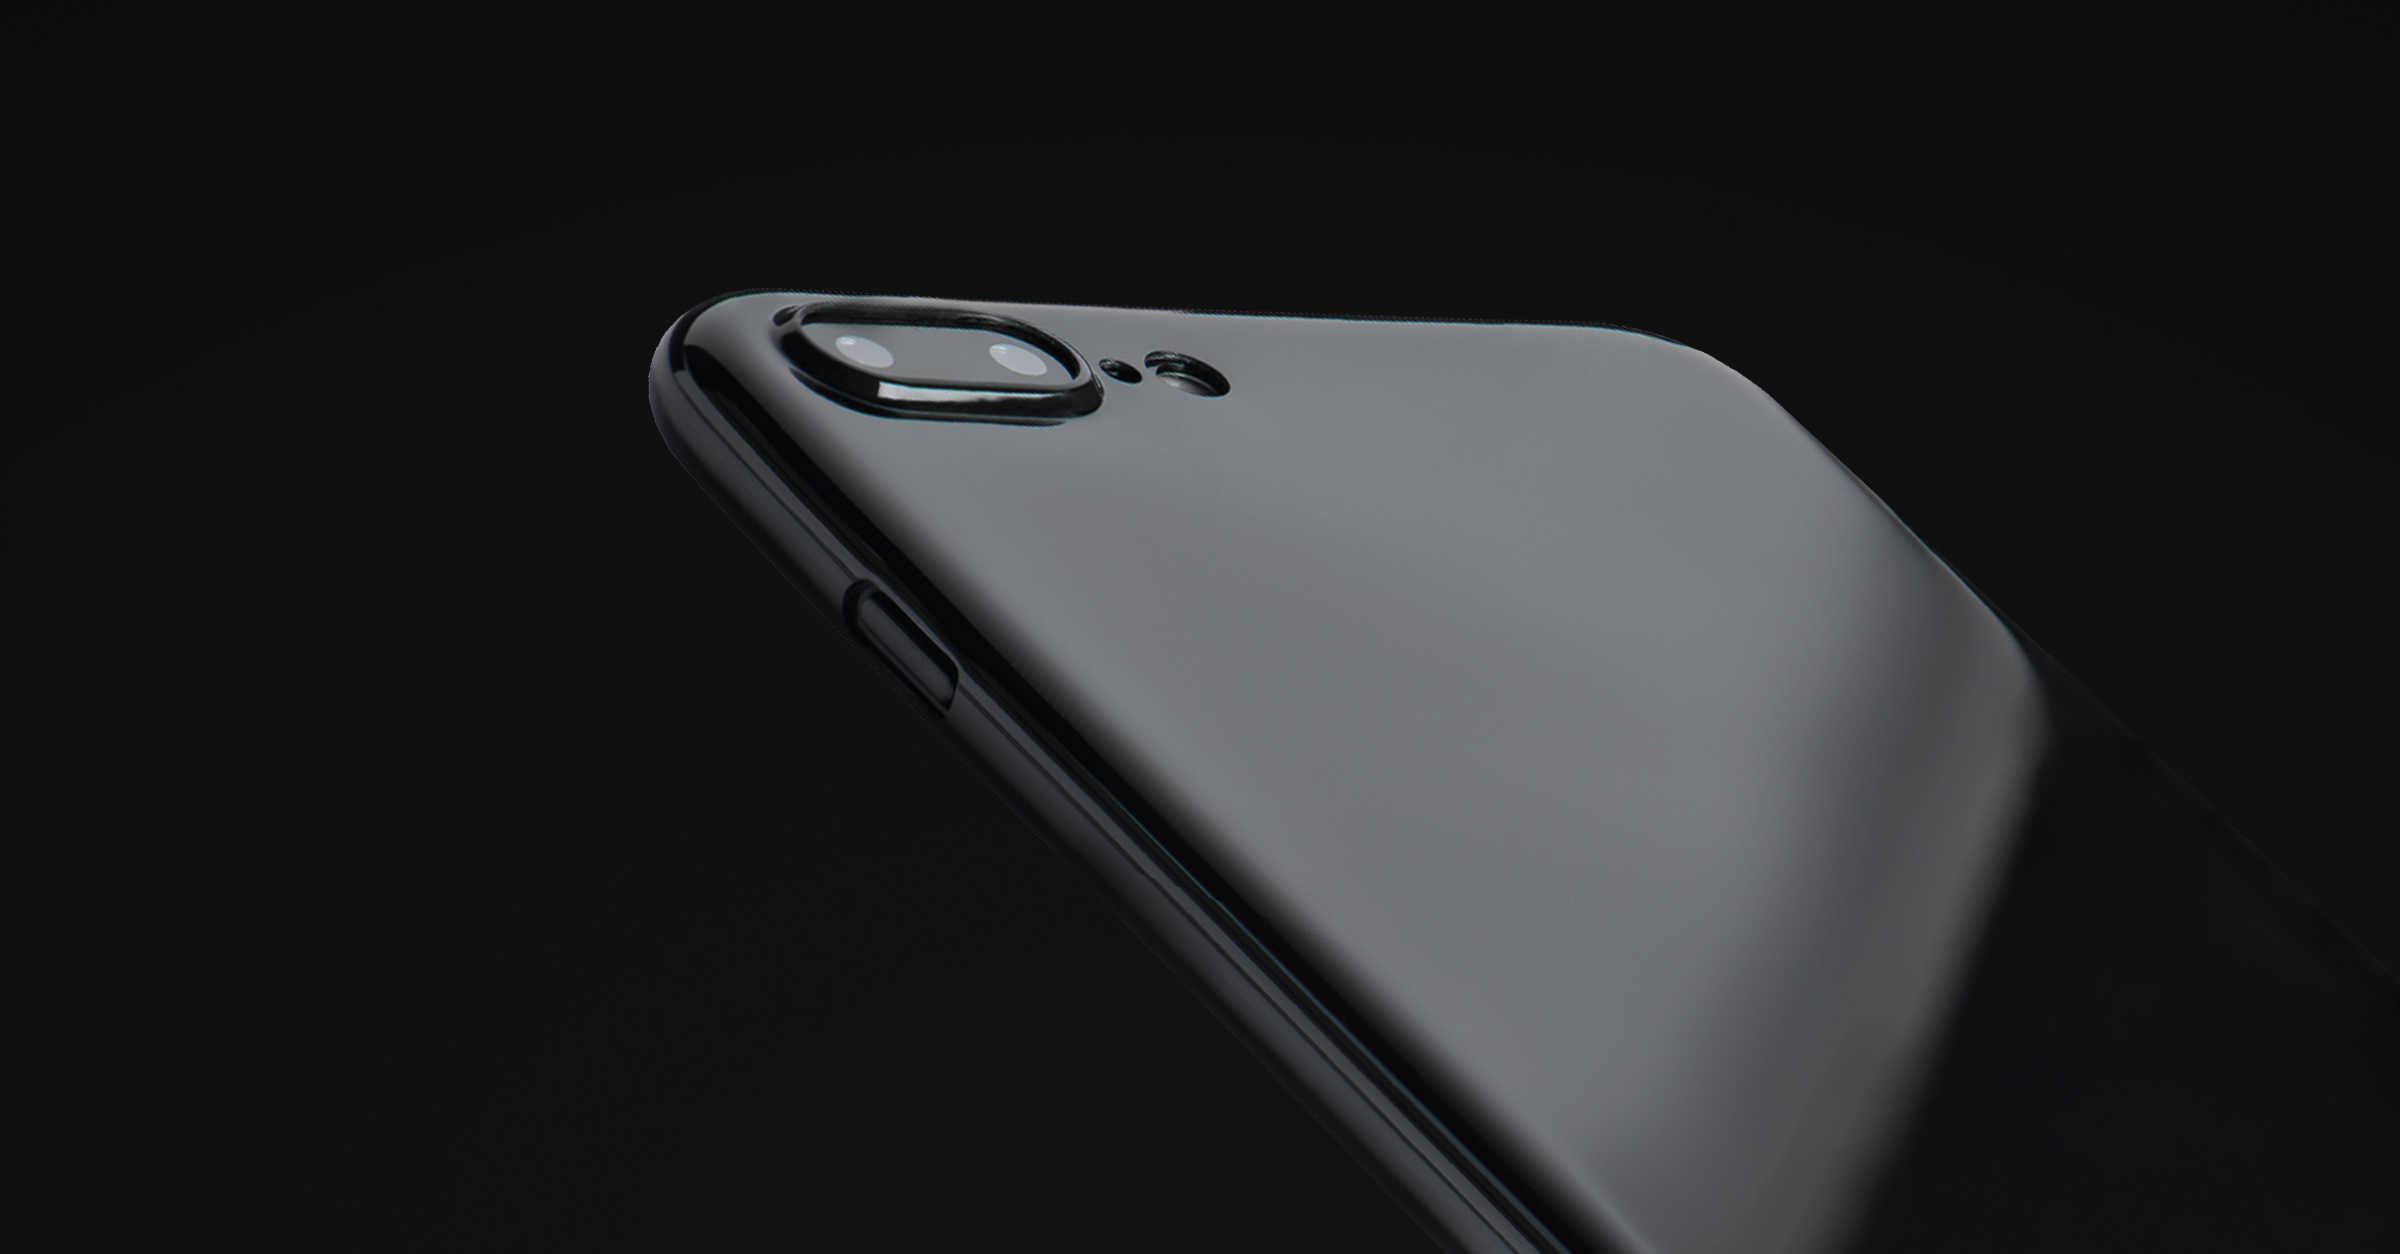 Whether you're wishing your iPhone were jet black, or it is and you want to protect it, this insanely slim case it what you're looking for,